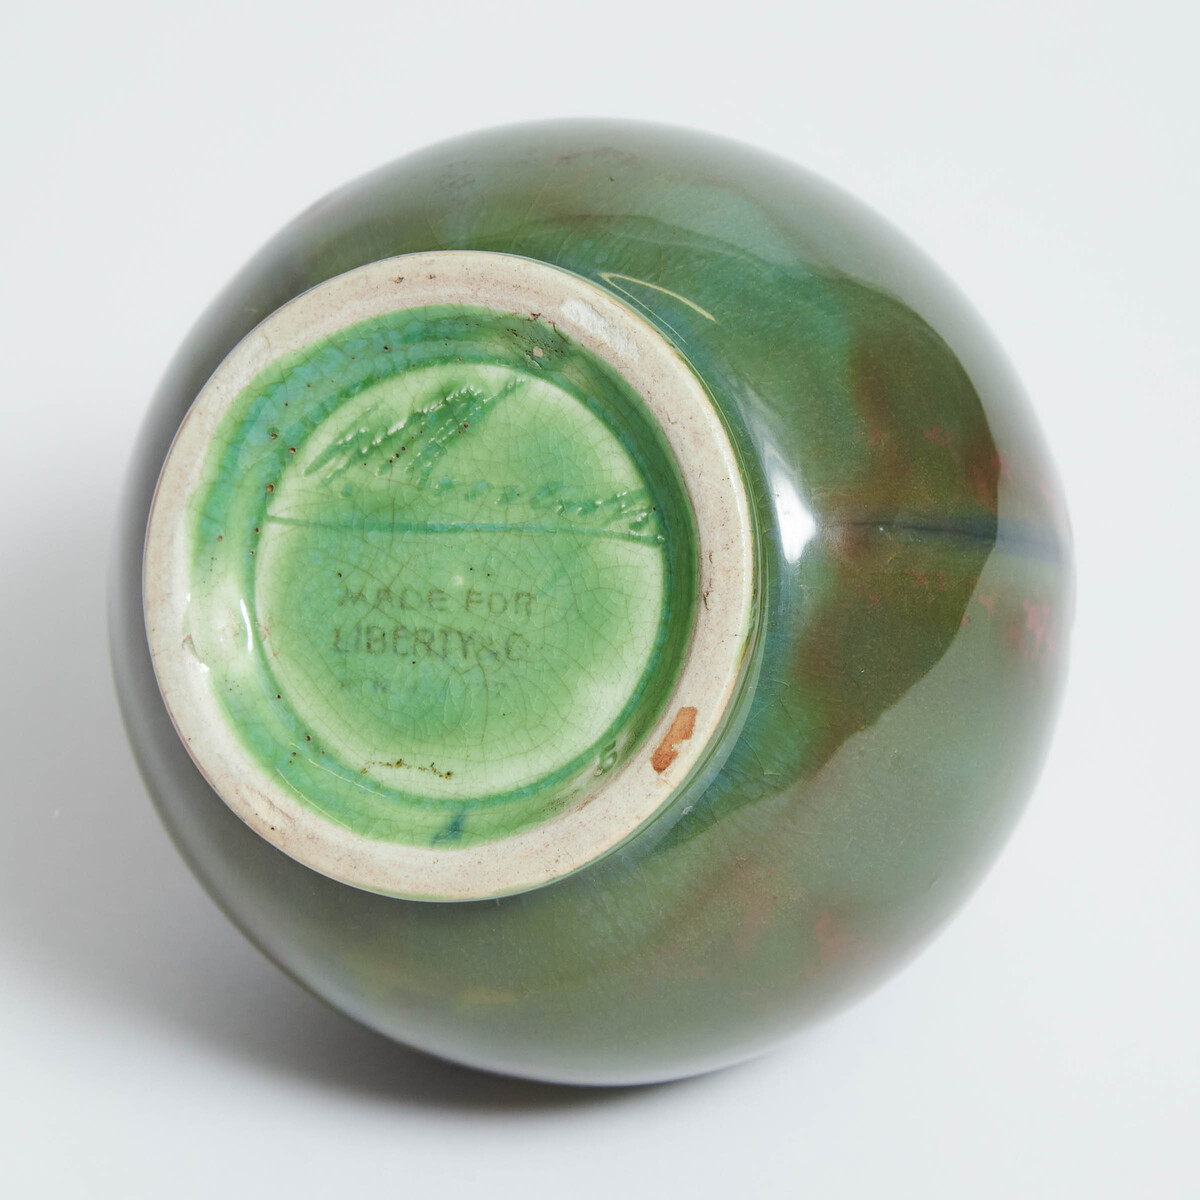 Macintyre Moorcroft Small Mottled Green Flamminian Vase, for Liberty & Co., c.1906-13, height 4 in — - Image 3 of 3